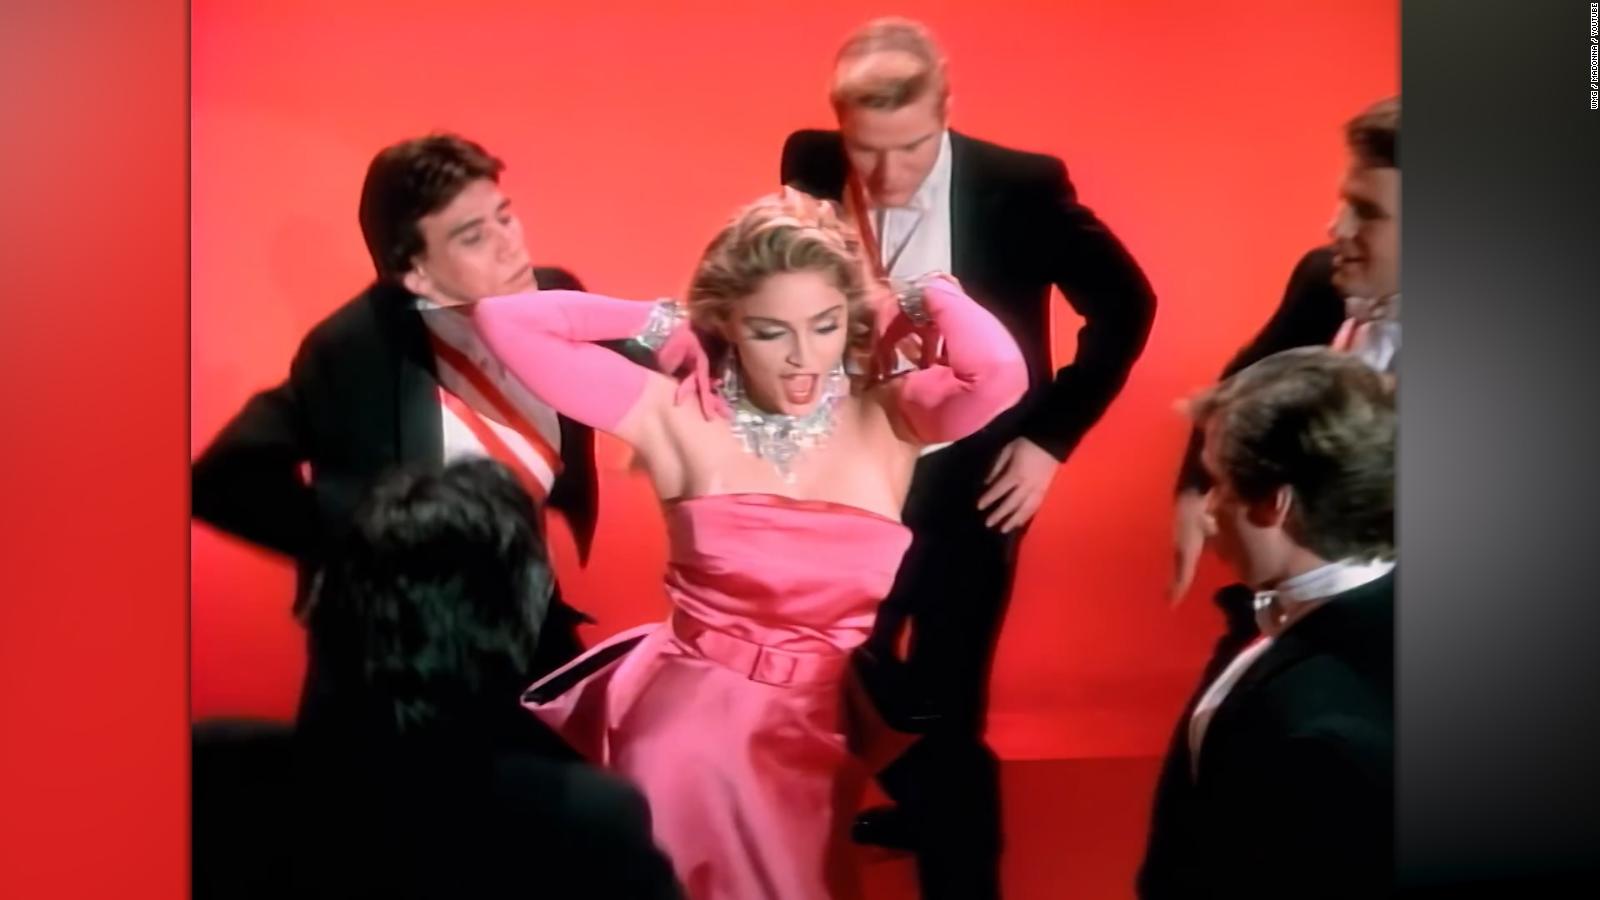 Video: Madonna's 'Material Girl' dress, inspired by Marilyn Monroe, is up  for auction - CNN Video